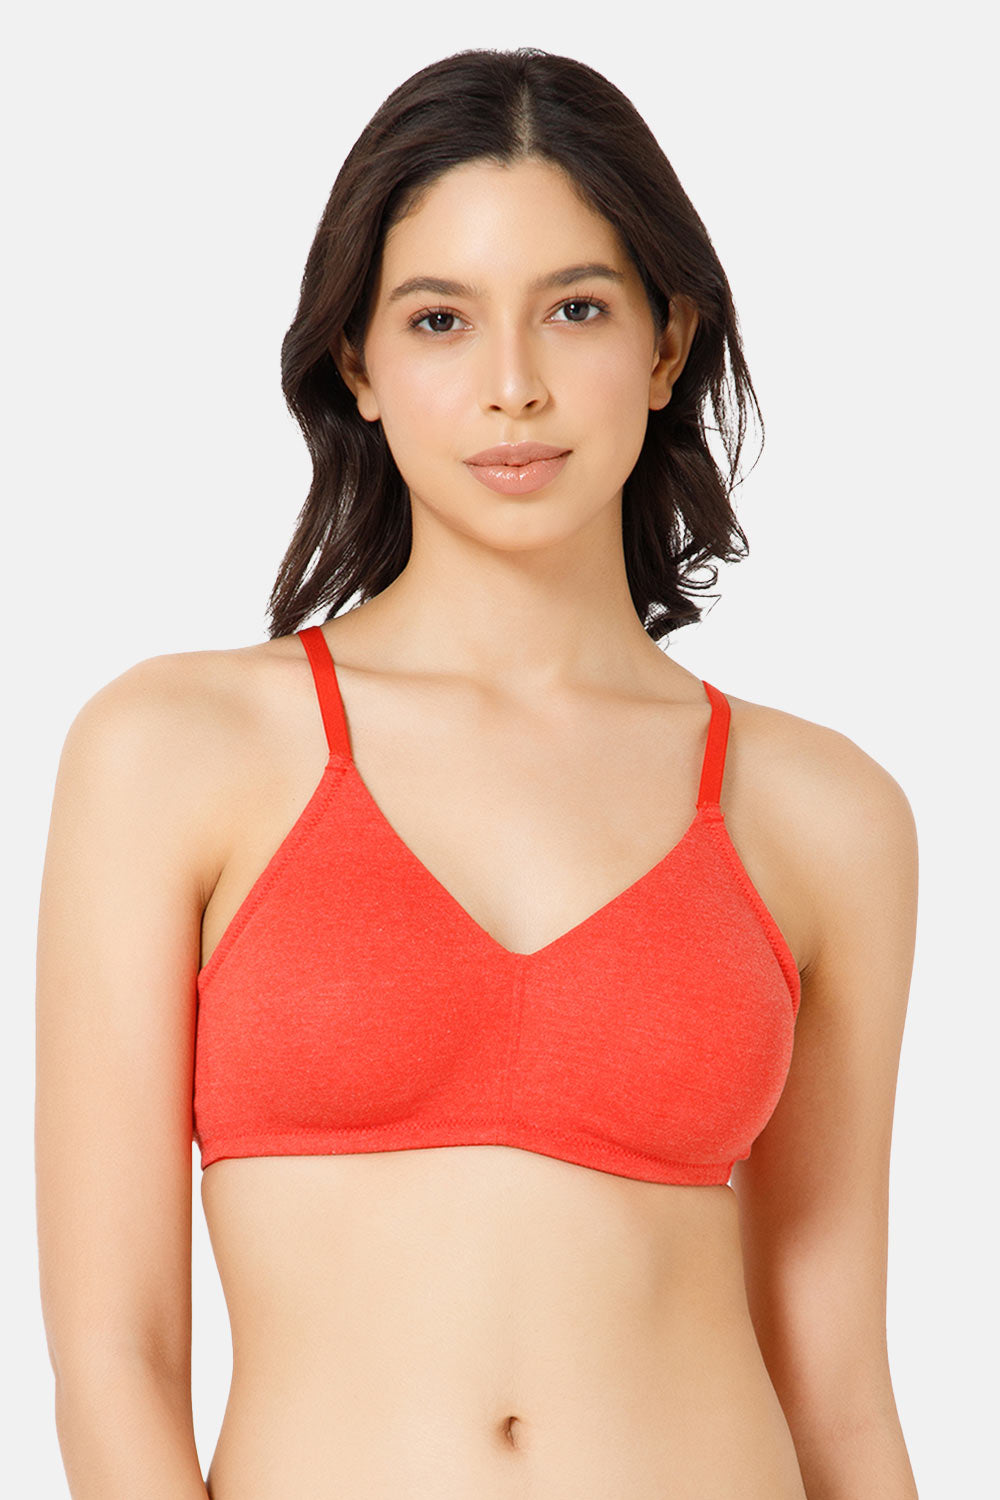 T-Shirt Ladies Red Net Nora Non Padded Bra, Size: 30B, Plain at Rs